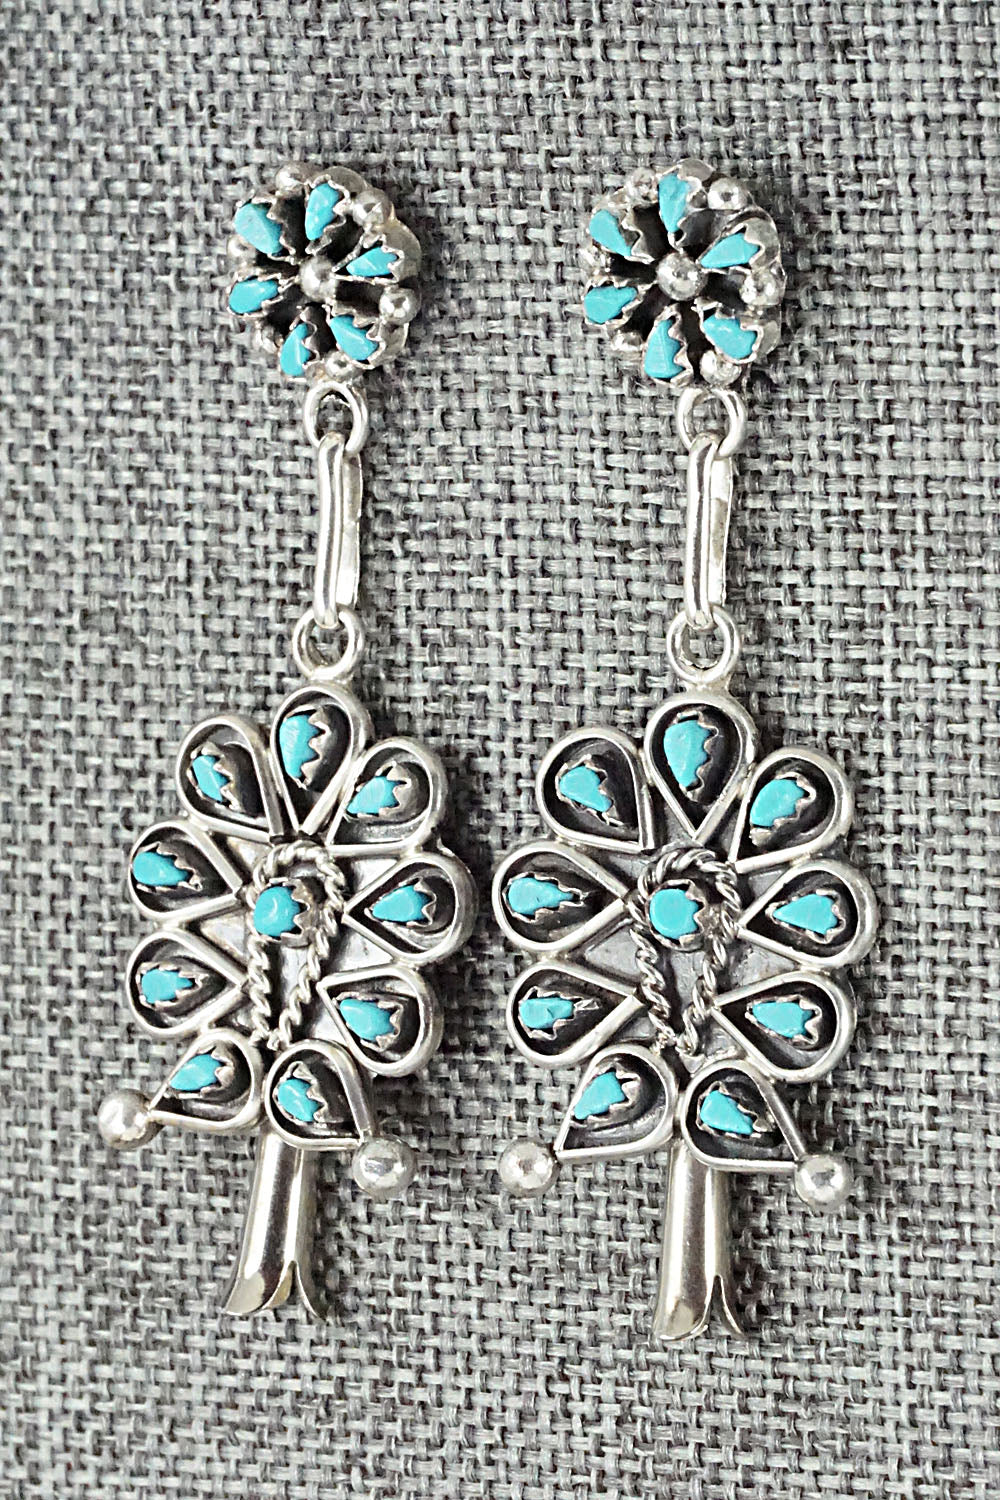 Turquoise & Sterling Silver Earrings - Tricia Leekity